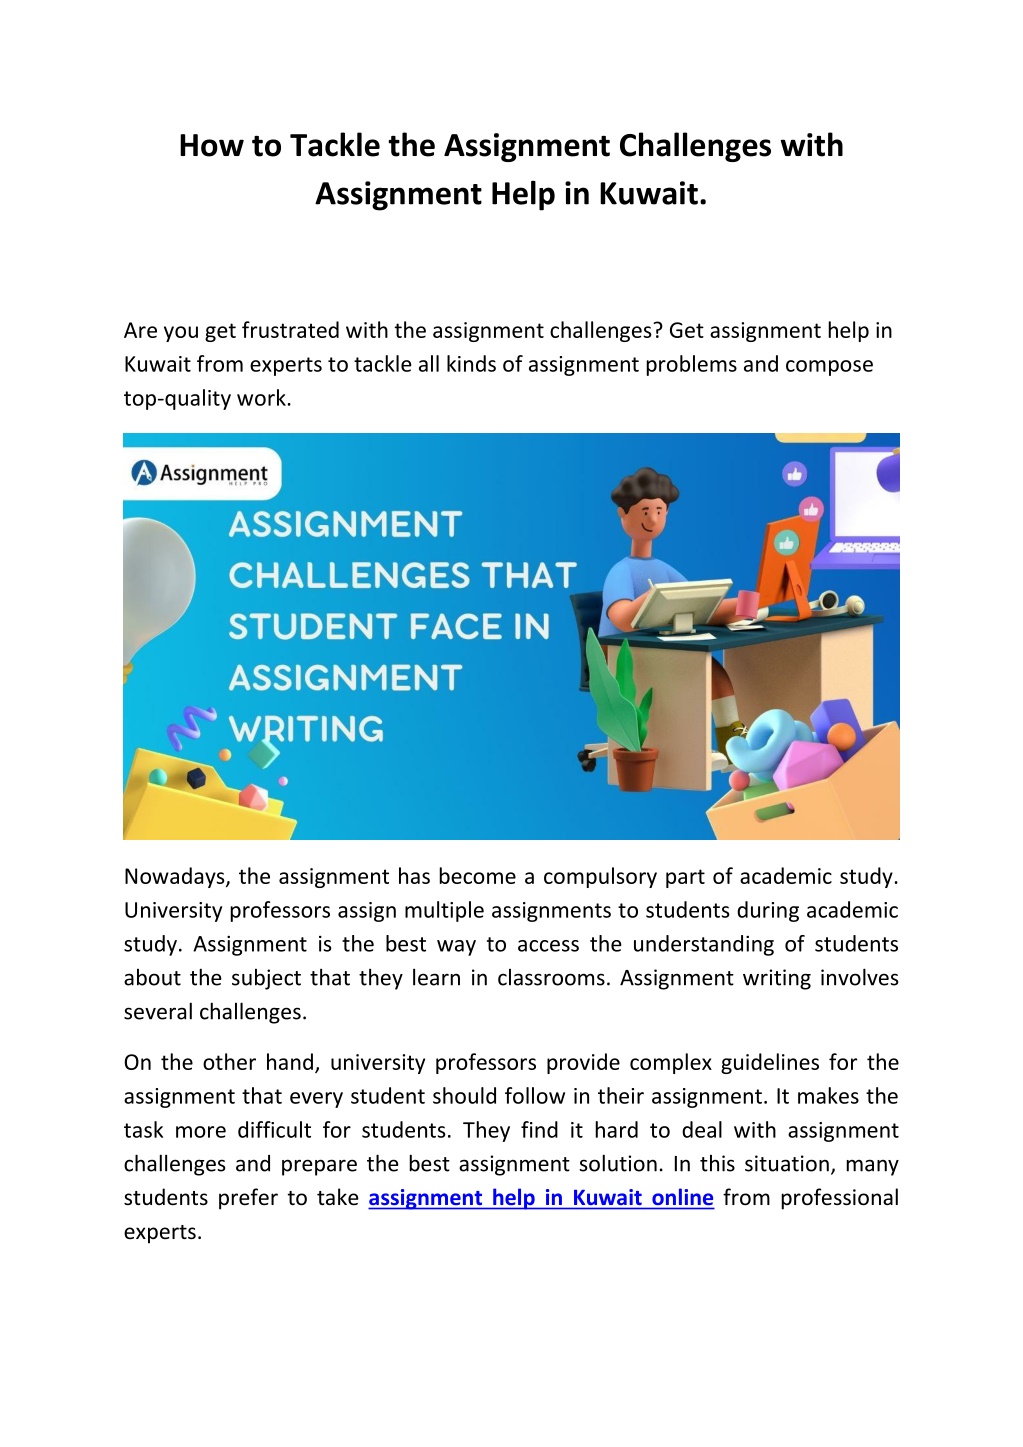 assignment challenges